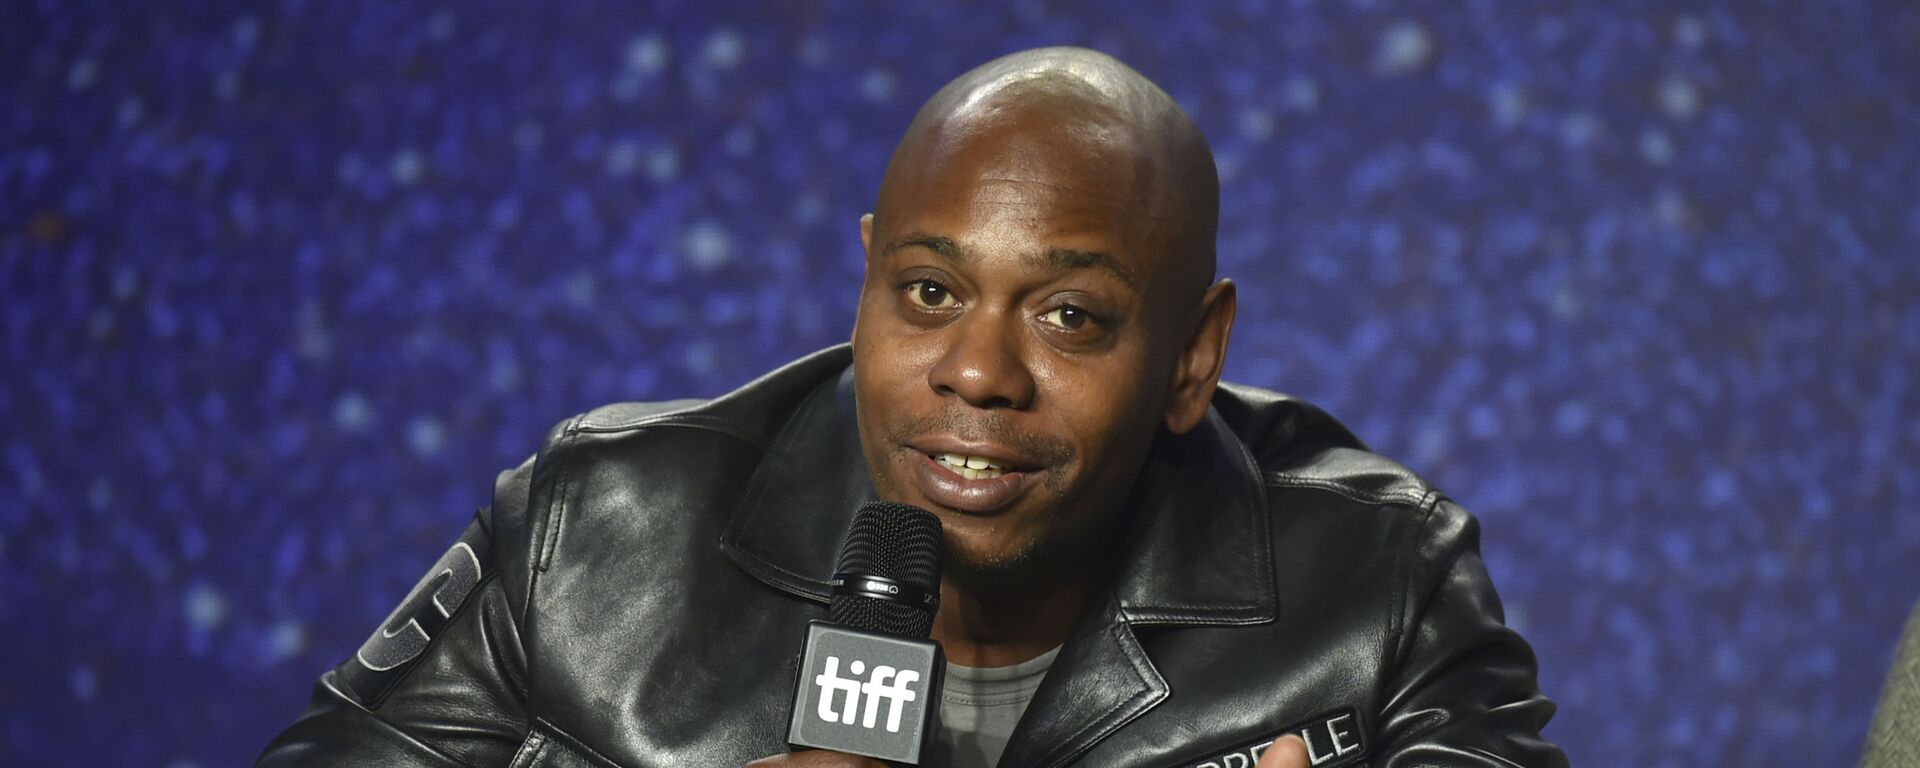 Dave Chappelle speaks at the press conference for A Star Is Born on day 4 of the Toronto International Film Festival at the TIFF Bell Lightbox on Sunday, Sept. 9, 2018, in Toronto.  - Sputnik International, 1920, 26.10.2021